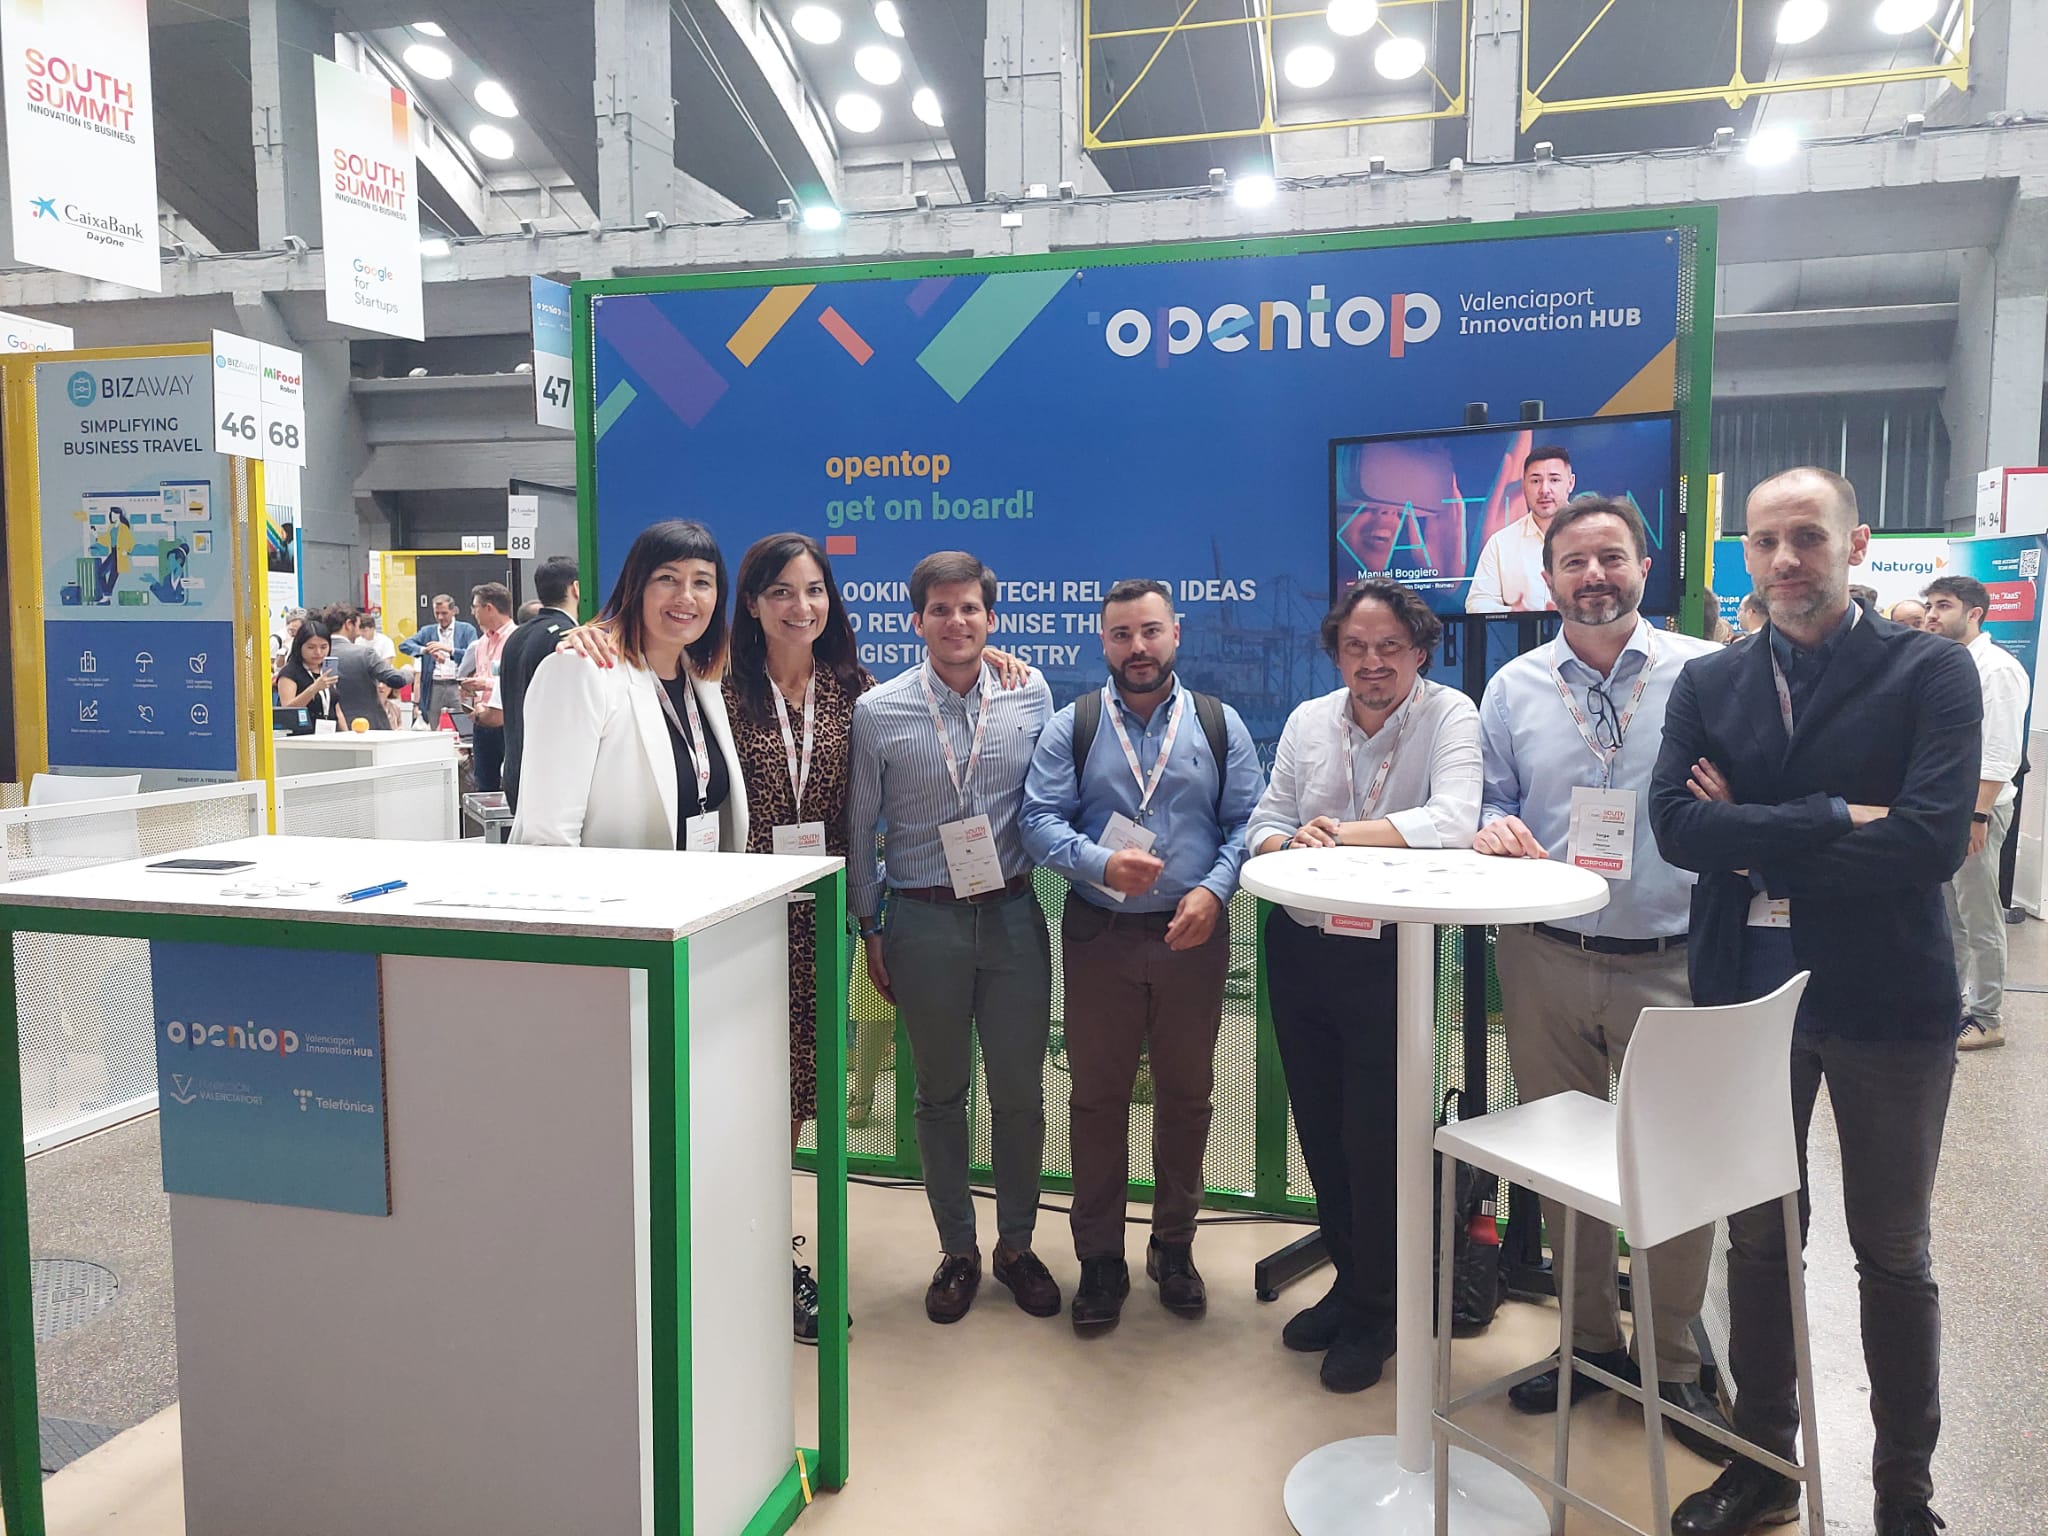 Equipo Opentop en stand South Summit